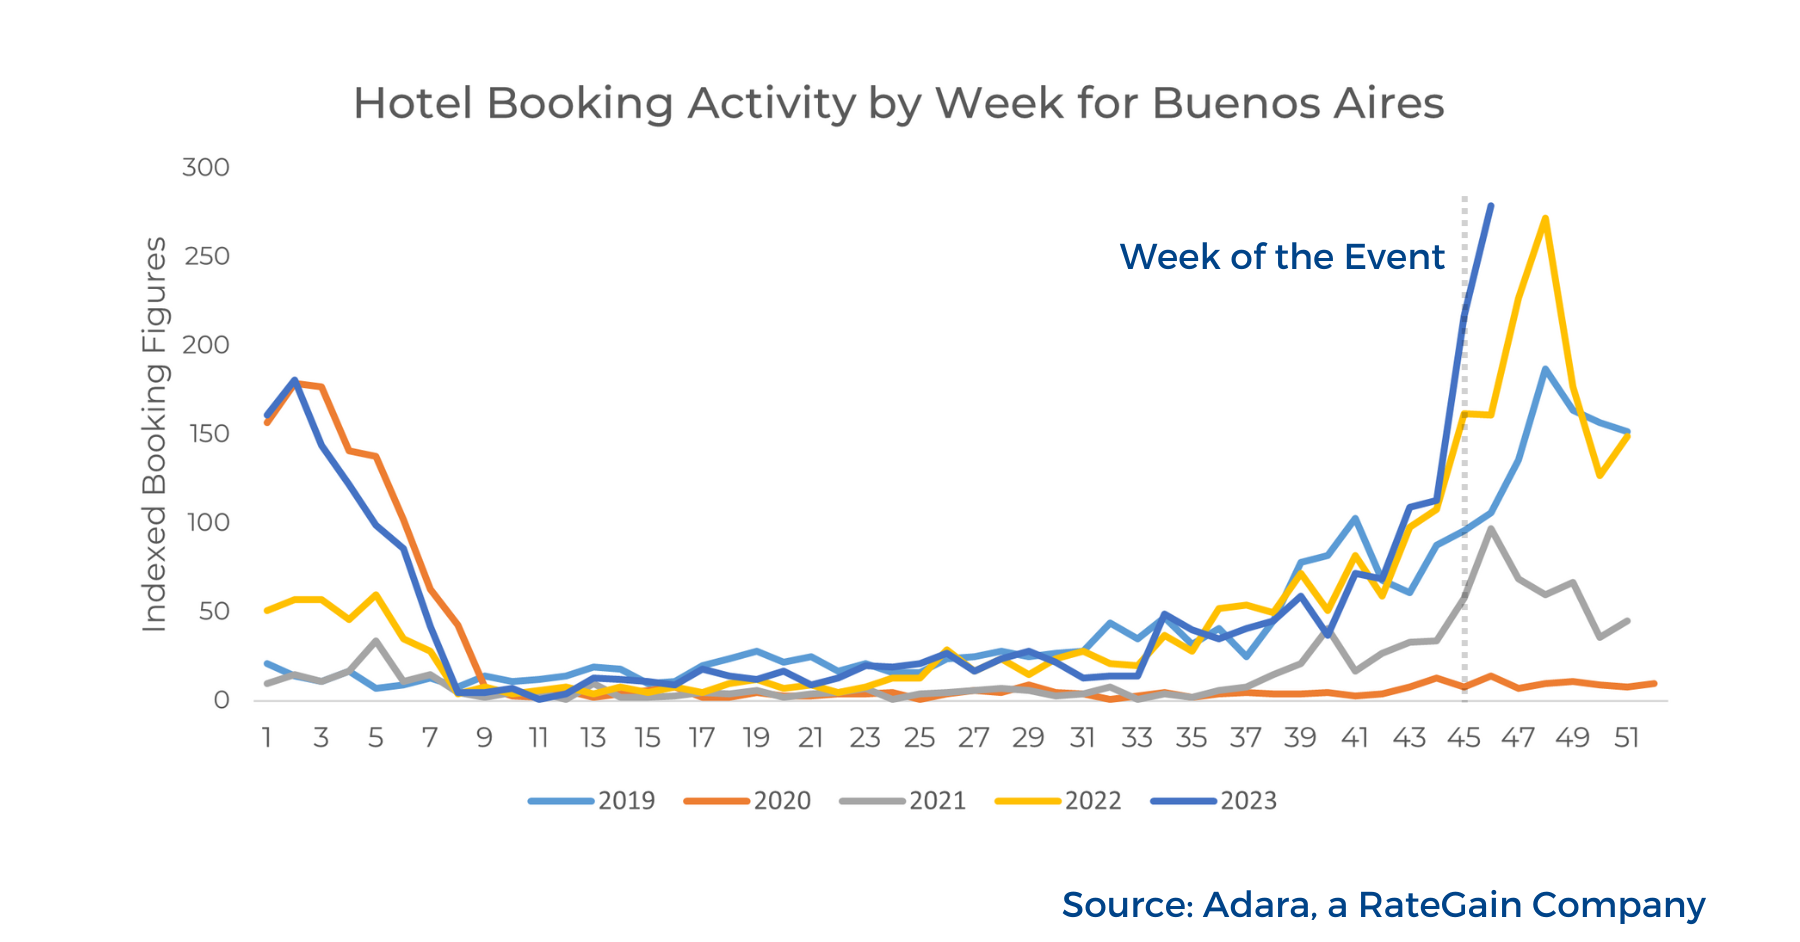 Hotel Booking Activity by Week for Buenos Aires